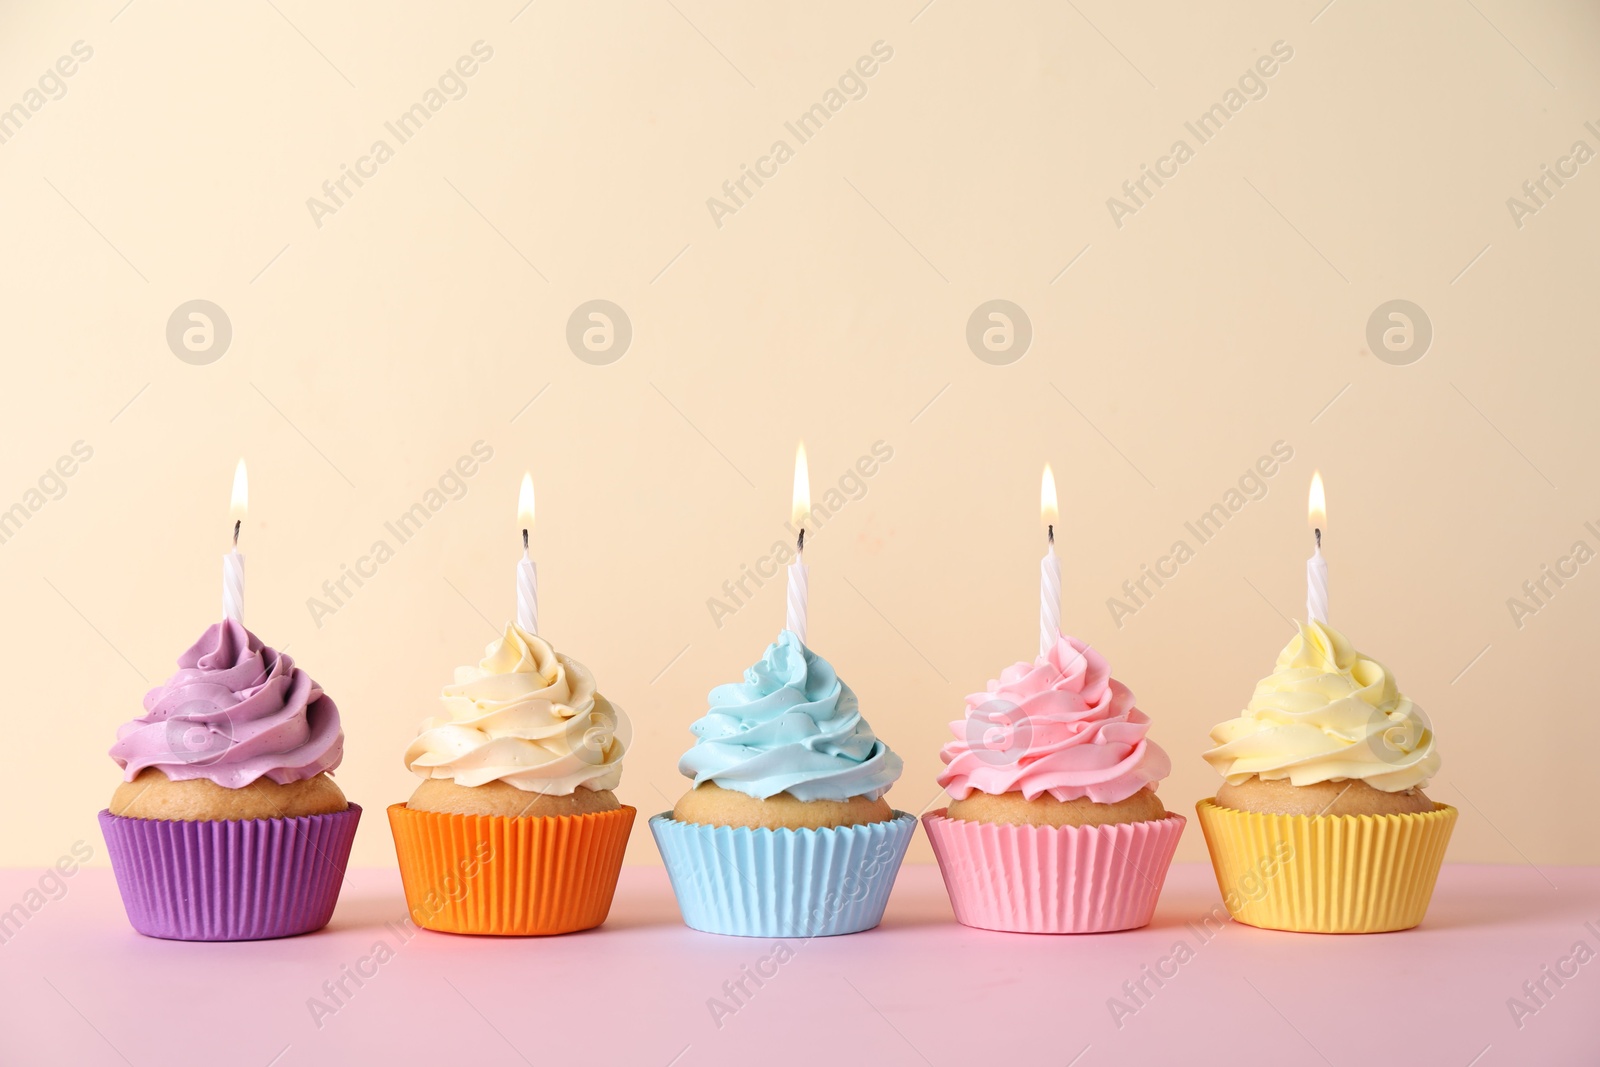 Photo of Delicious birthday cupcakes with burning candles on pink table against beige background